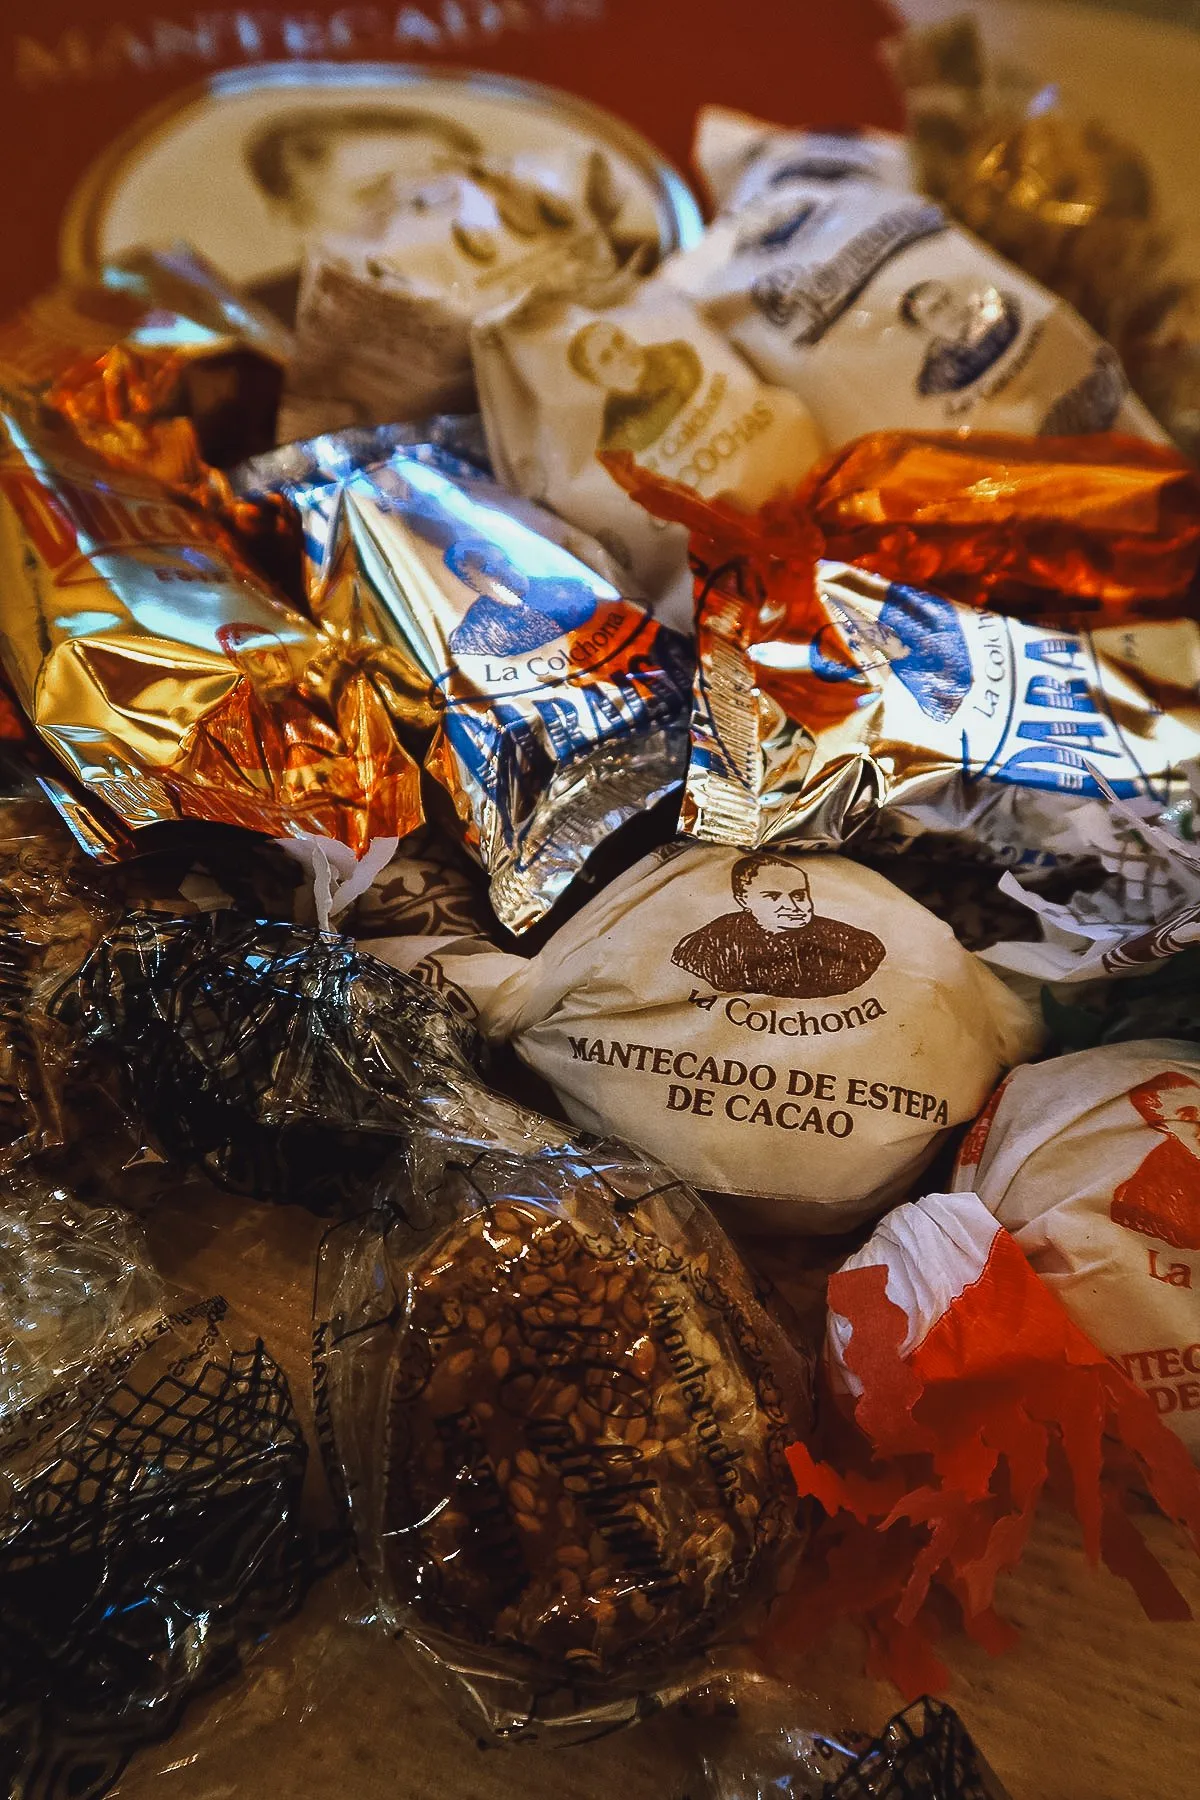 Traditional Spanish confections from a shop in Seville